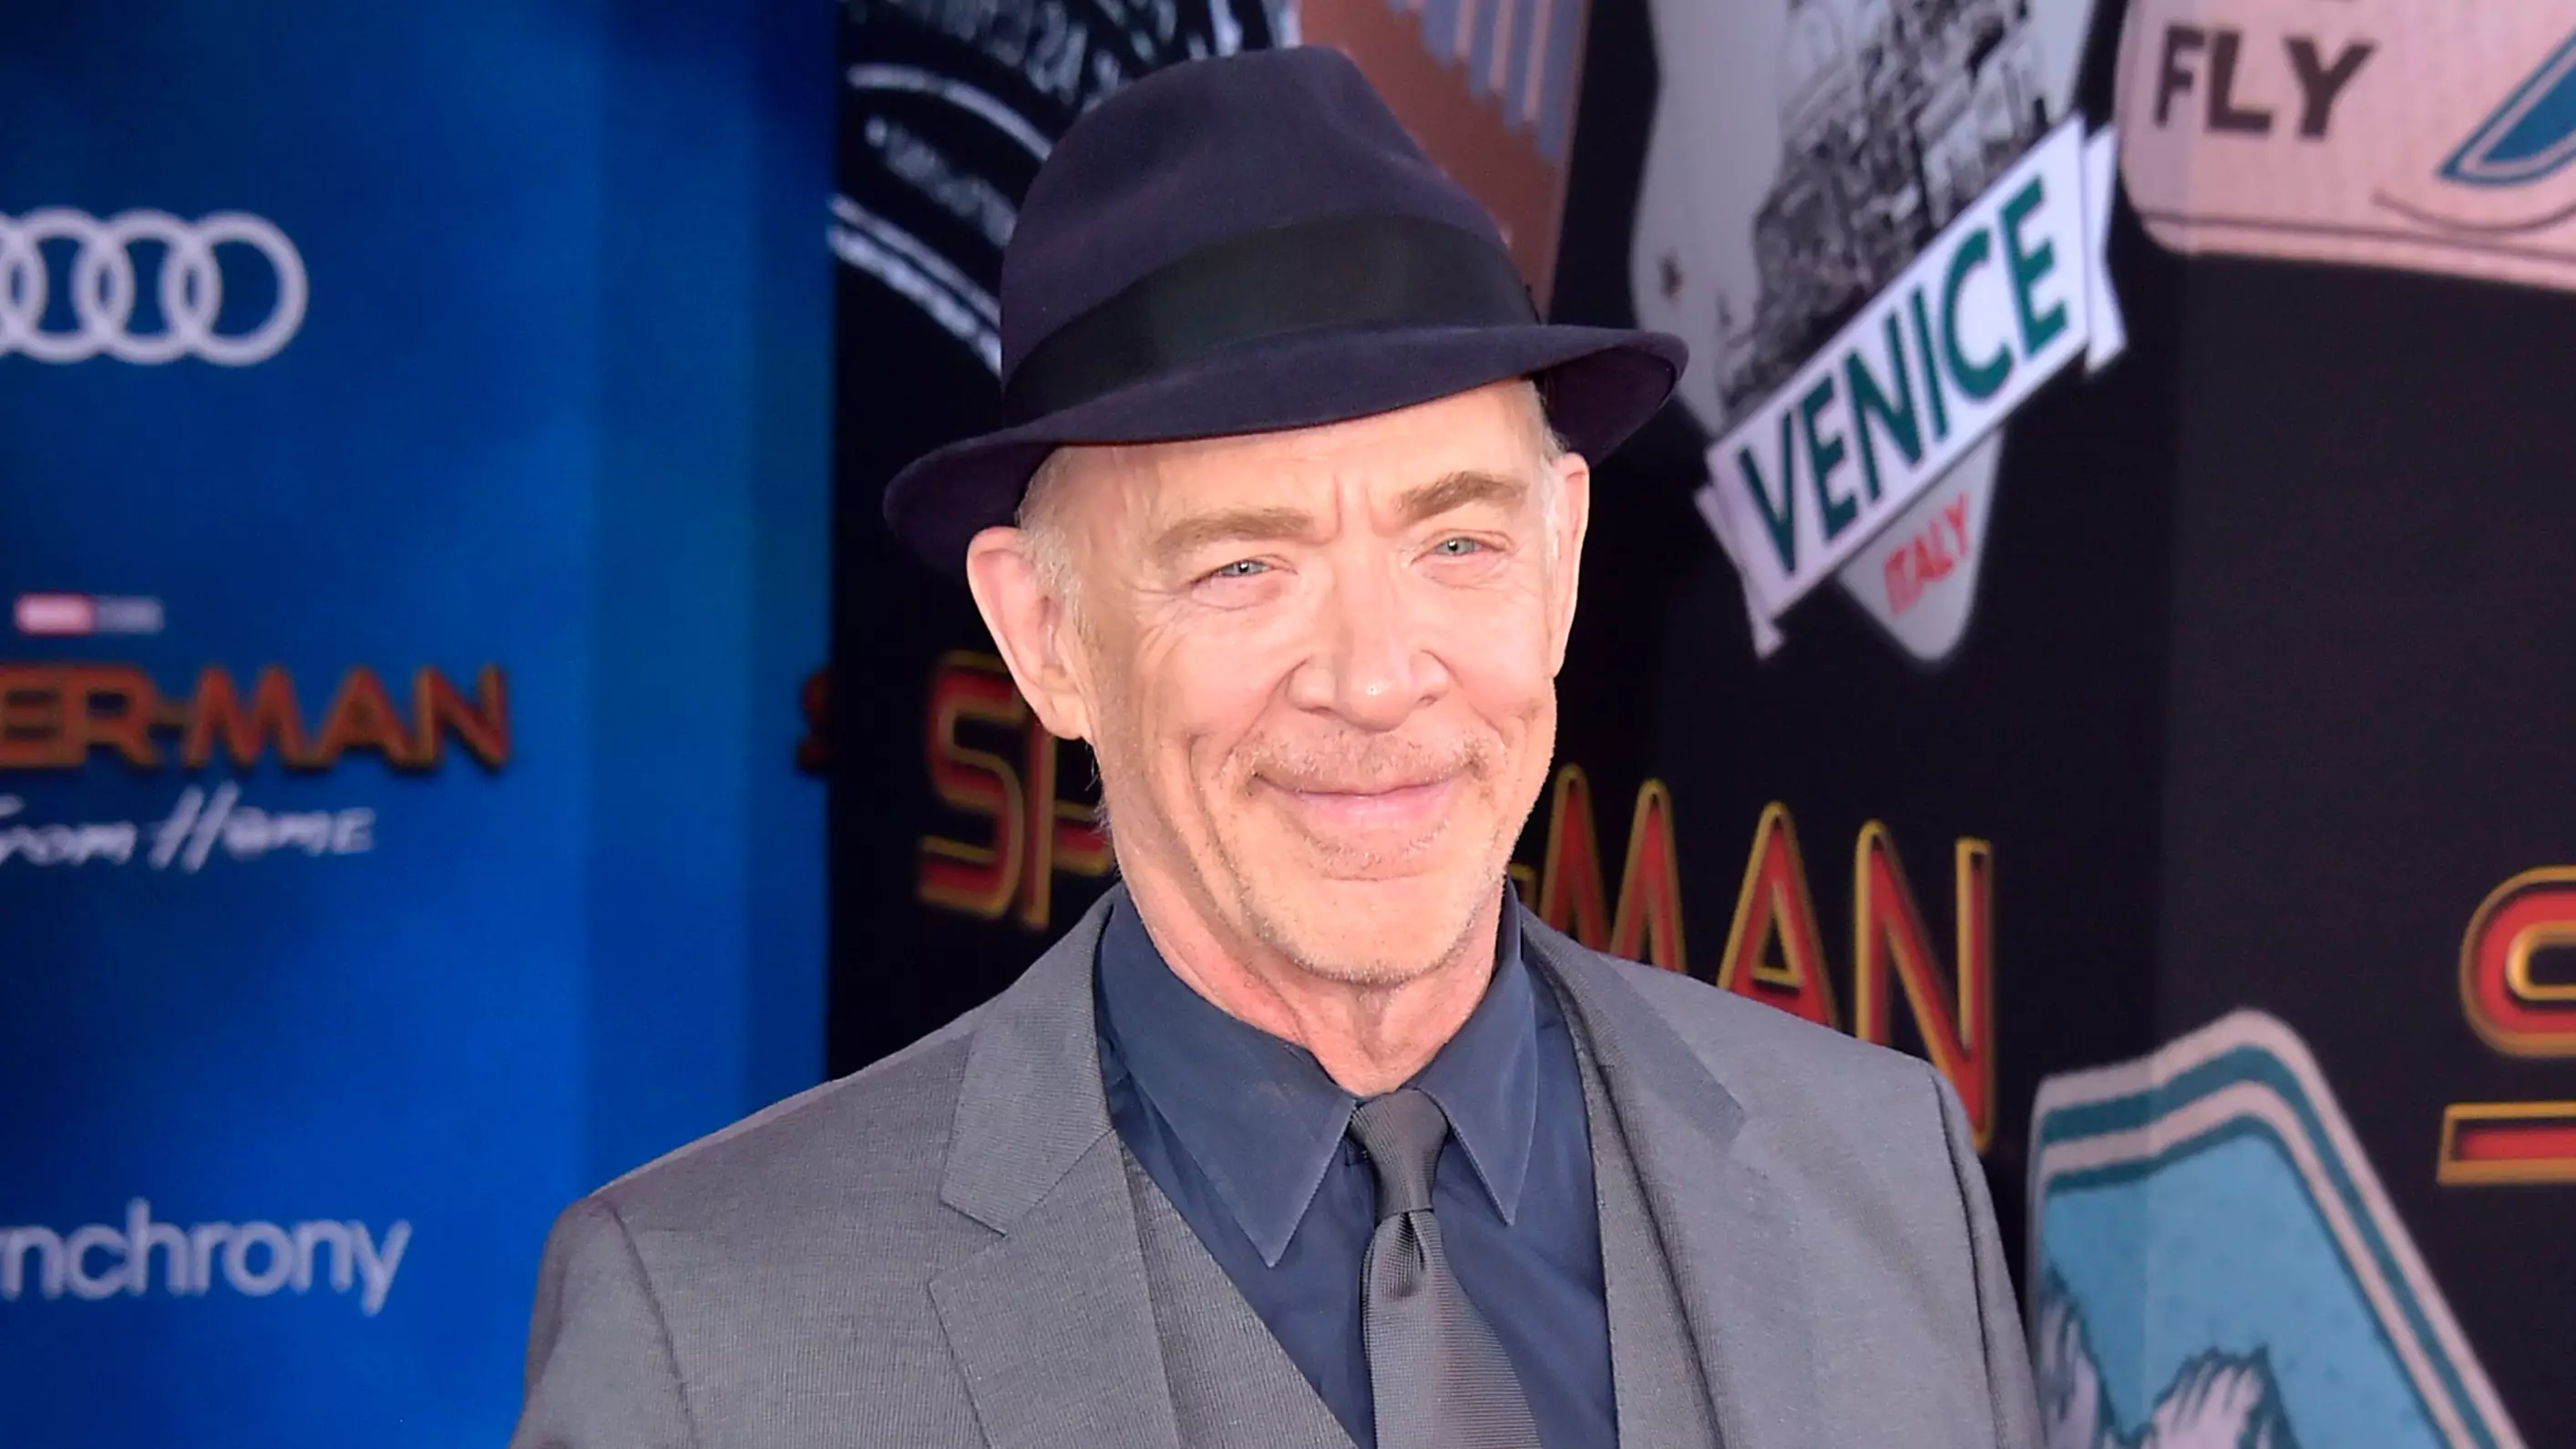 J.K. Simmons Signed On For Spider-Man Sequels